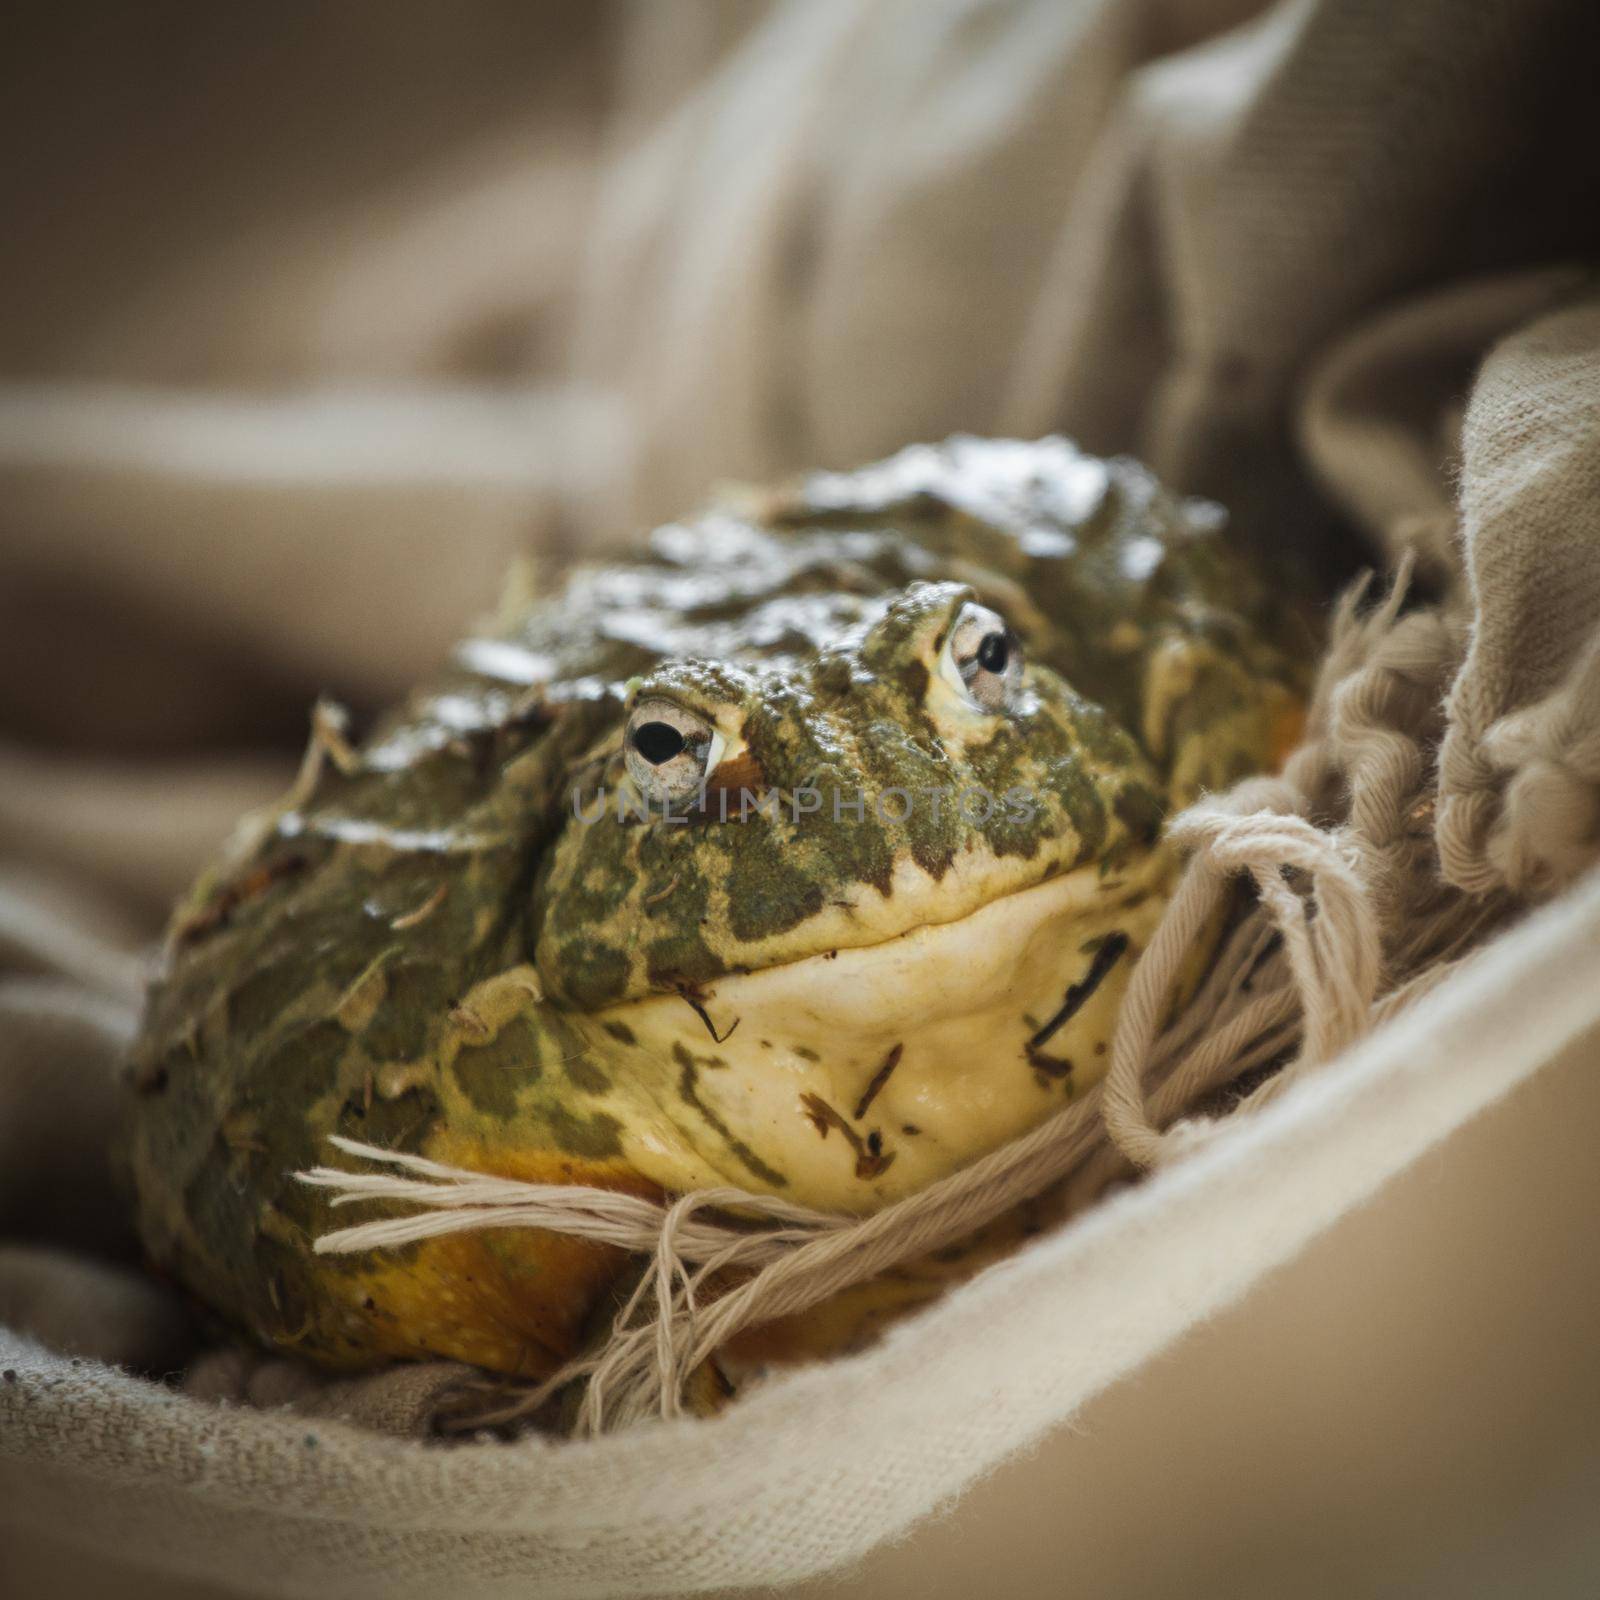 The African bullfrog in front of window by RosaJay